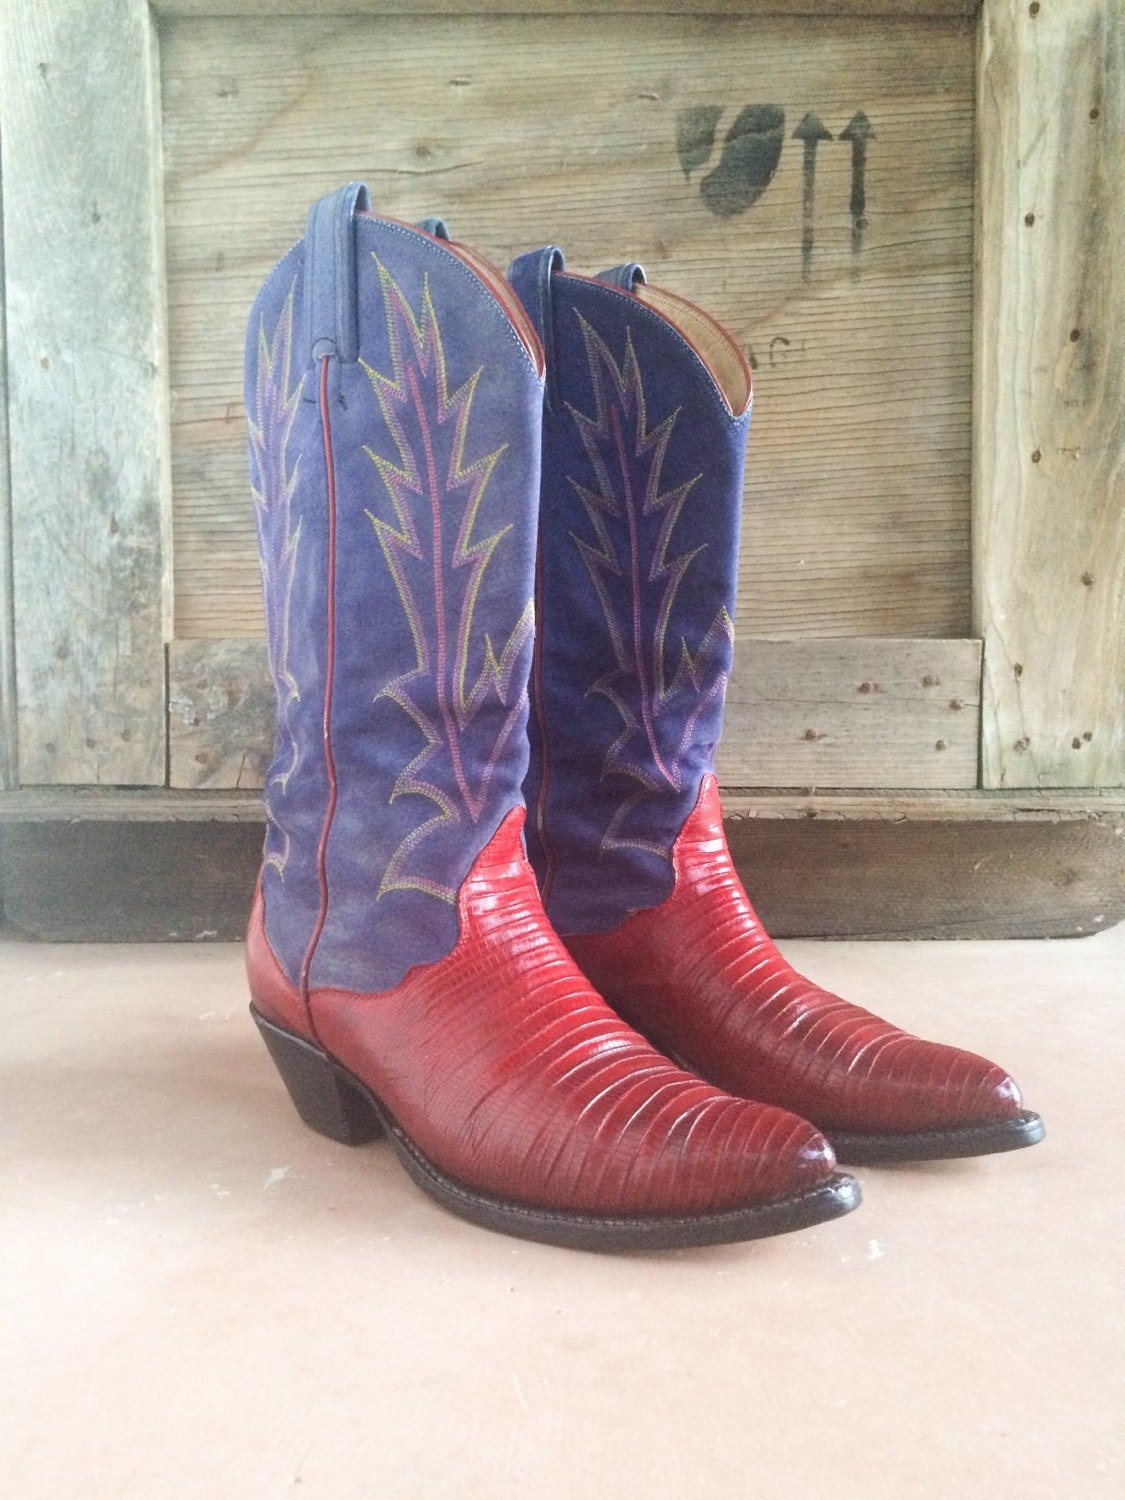 Vintage Women's Cowboy Boots Lizard Skin Red Cowgirl Boots with Blue ...